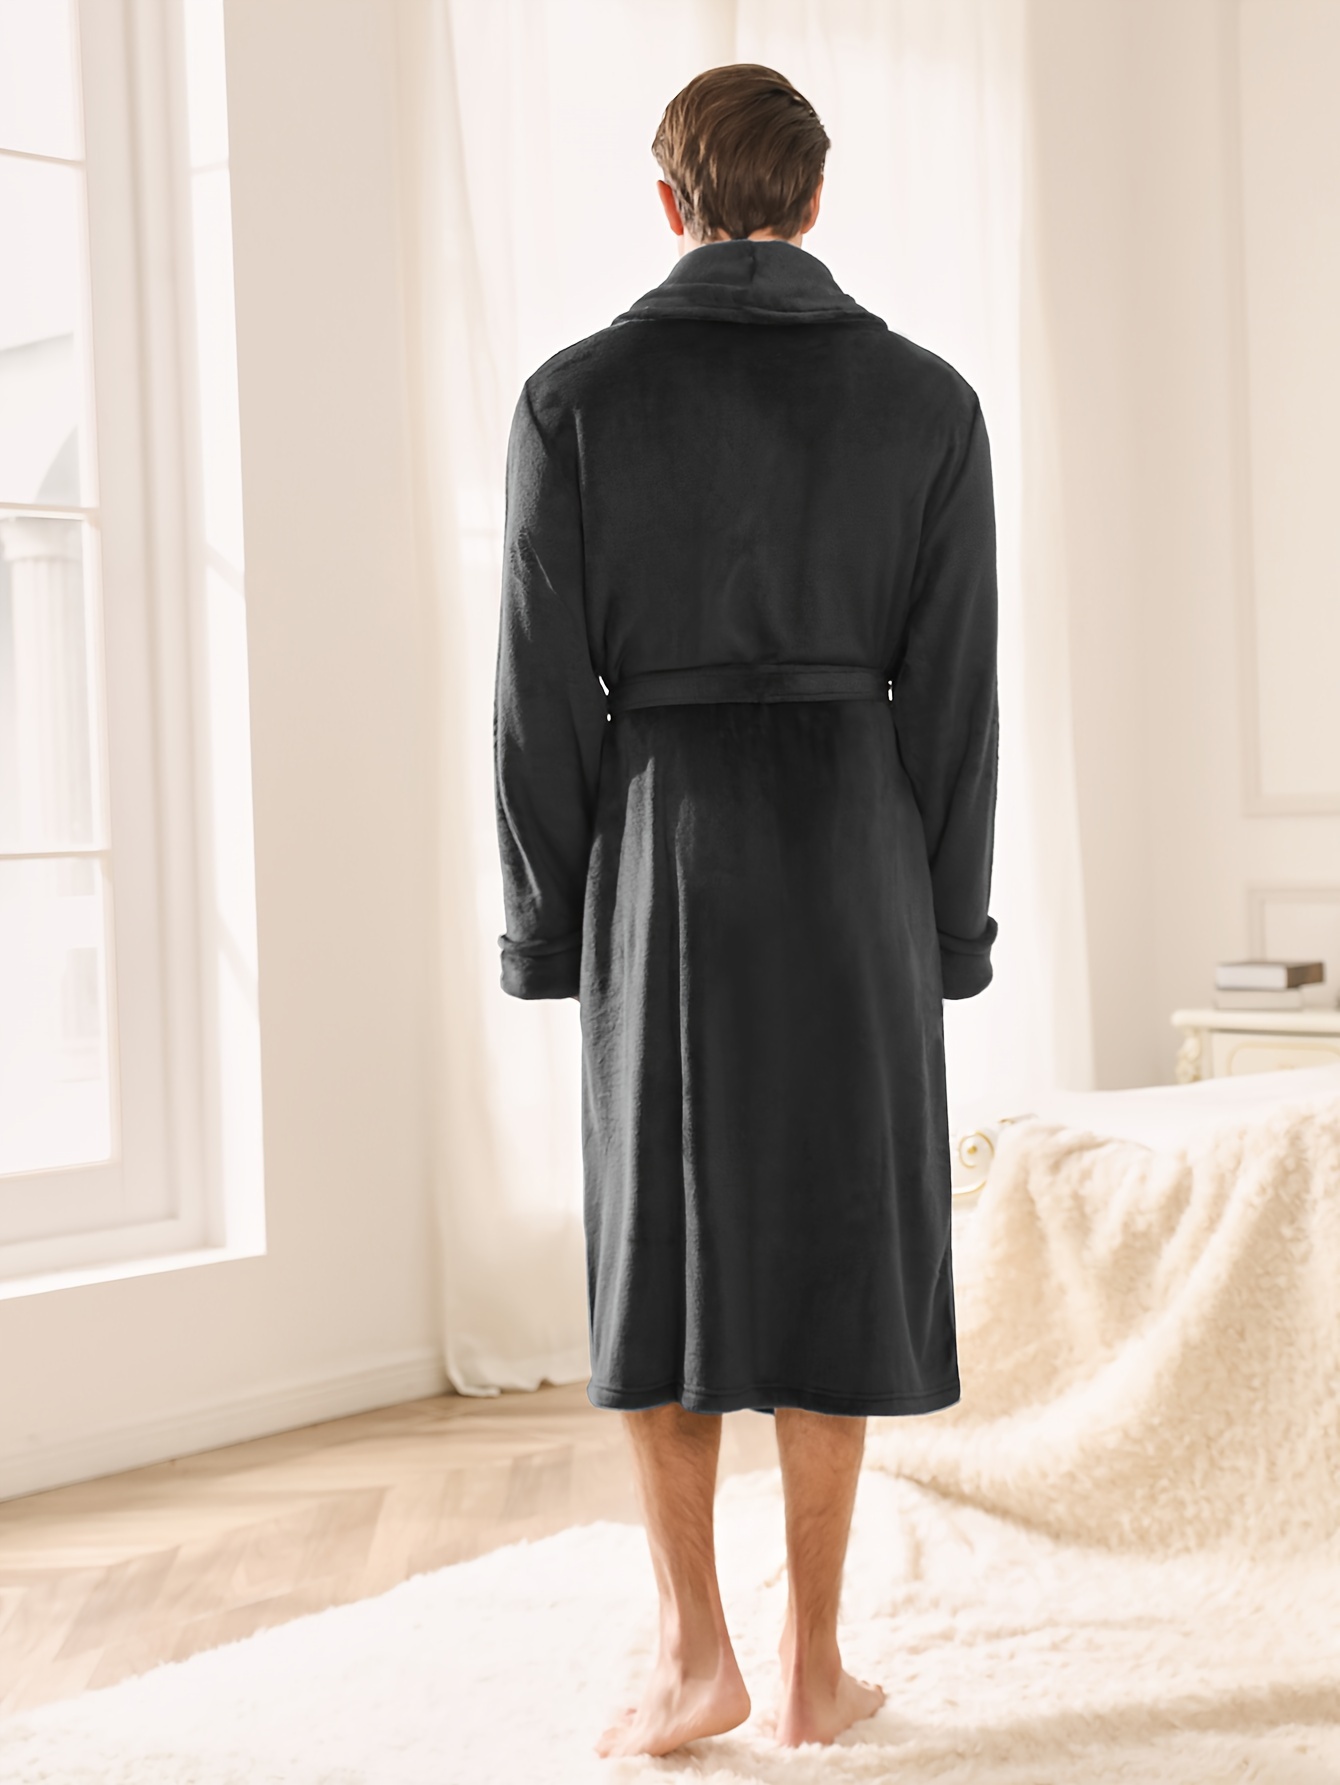 Men's Trendy Soft Comfy Plain Color Robe For Home Pajamas Wear Night-robe  Sets After A Bath